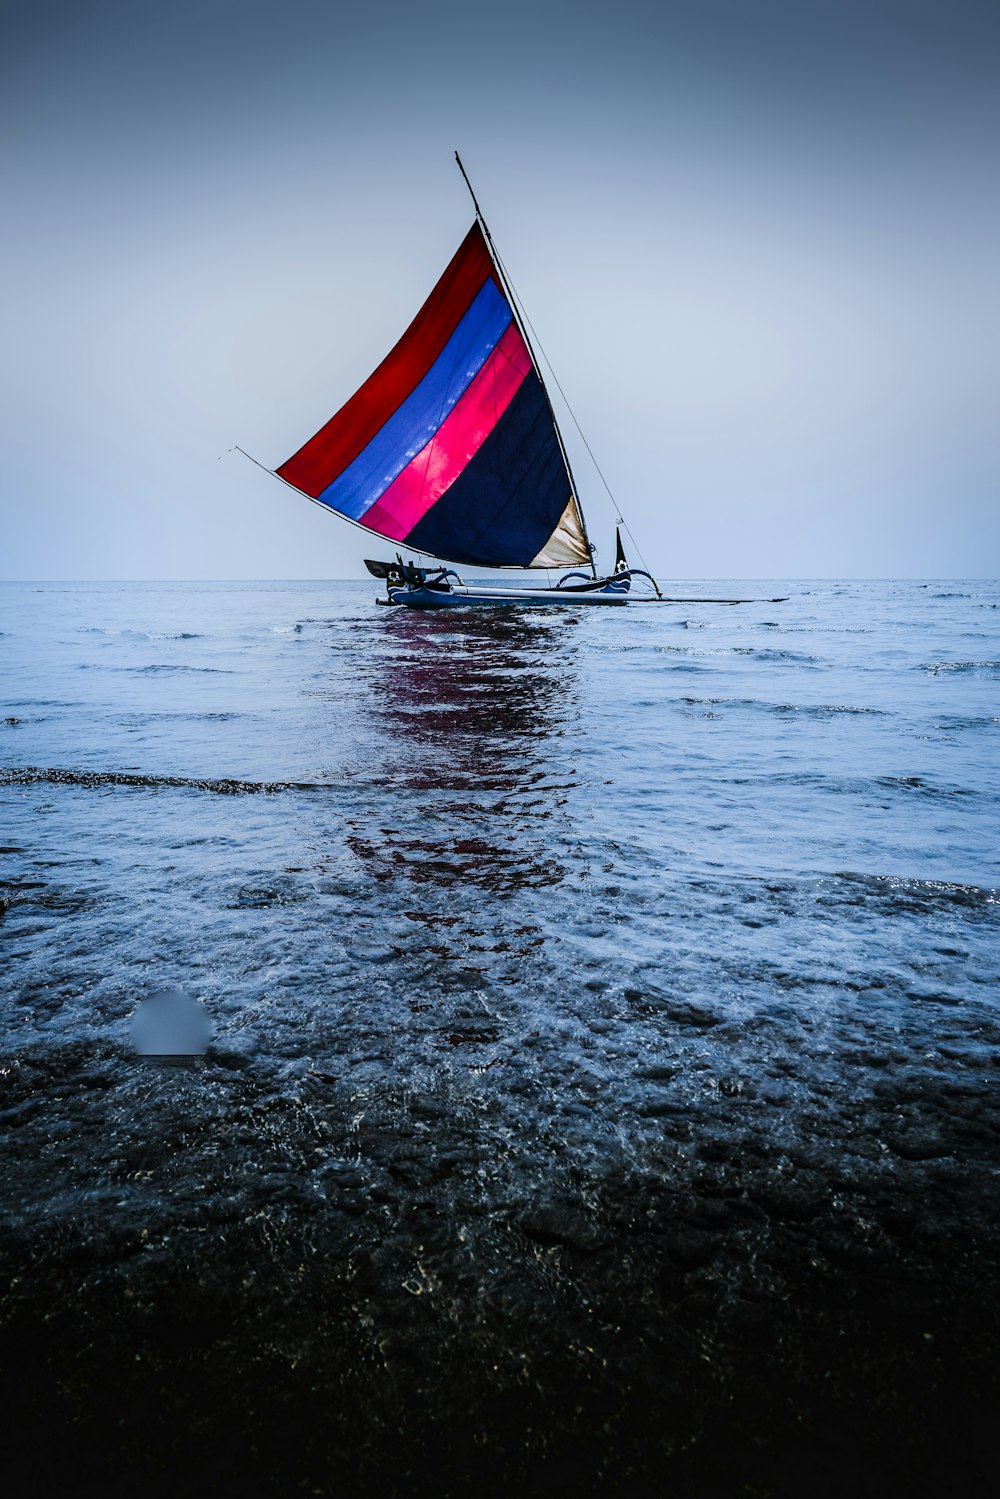 multicolored sailboat on calm water at daytime